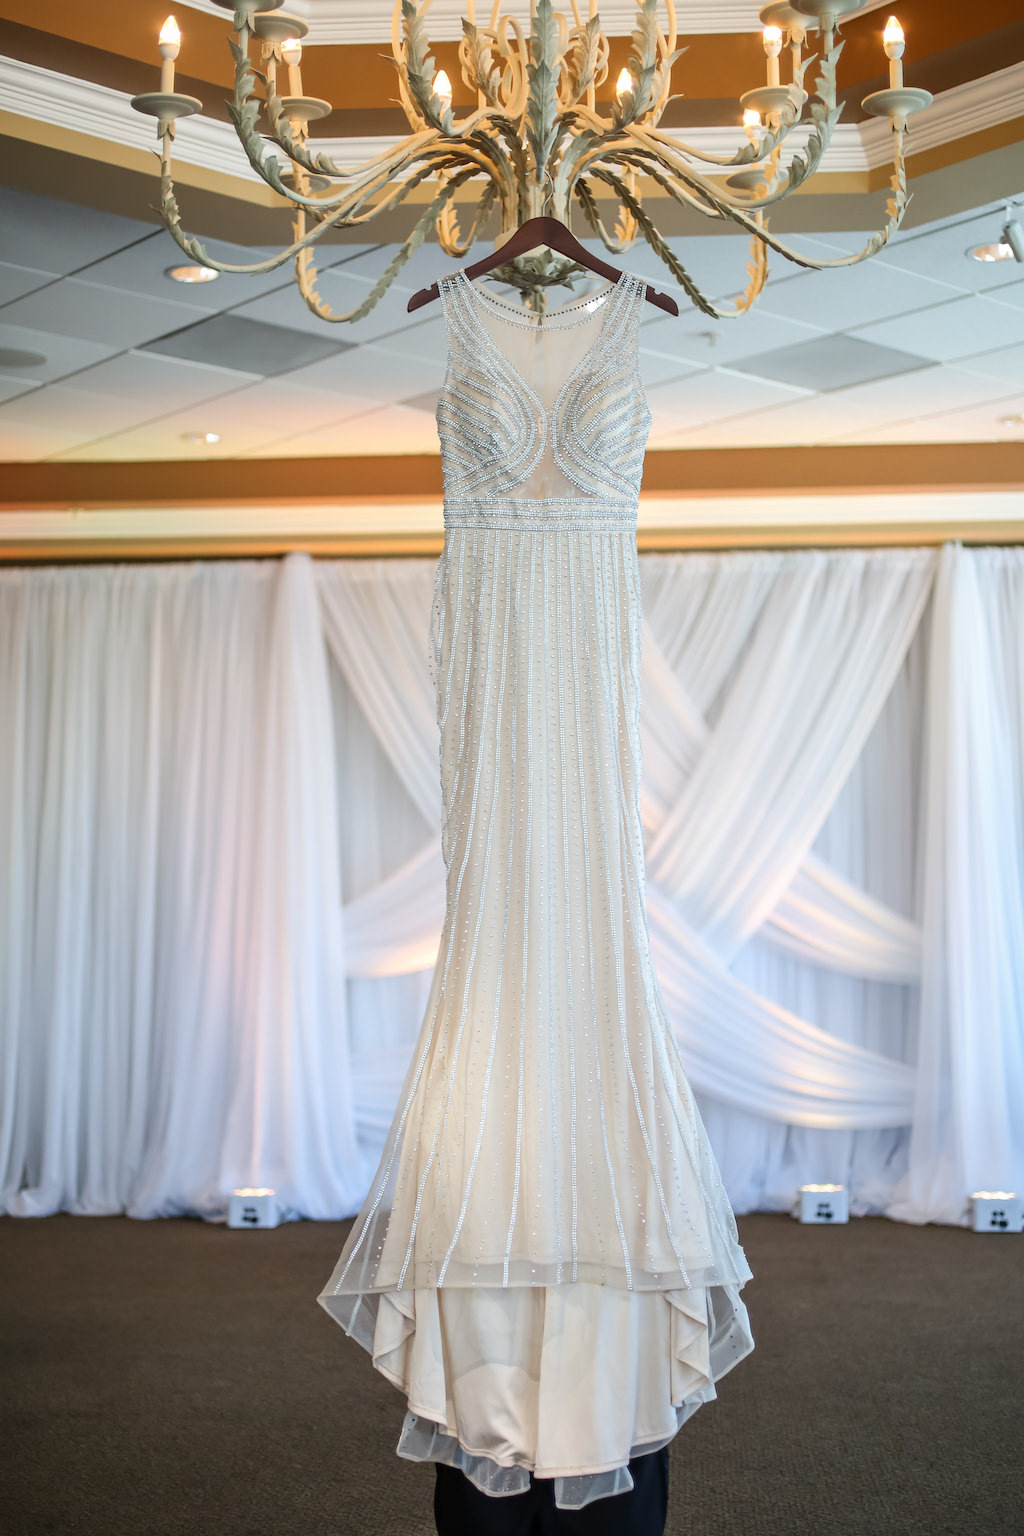 Jeweled Illusion V Neck Wedding Dress on Hanger with Chandelier and White Draping | Tampa Bay Bridal Boutique Truly Forever Bridal | Wedding Rentals and Draping Gabro Event Services